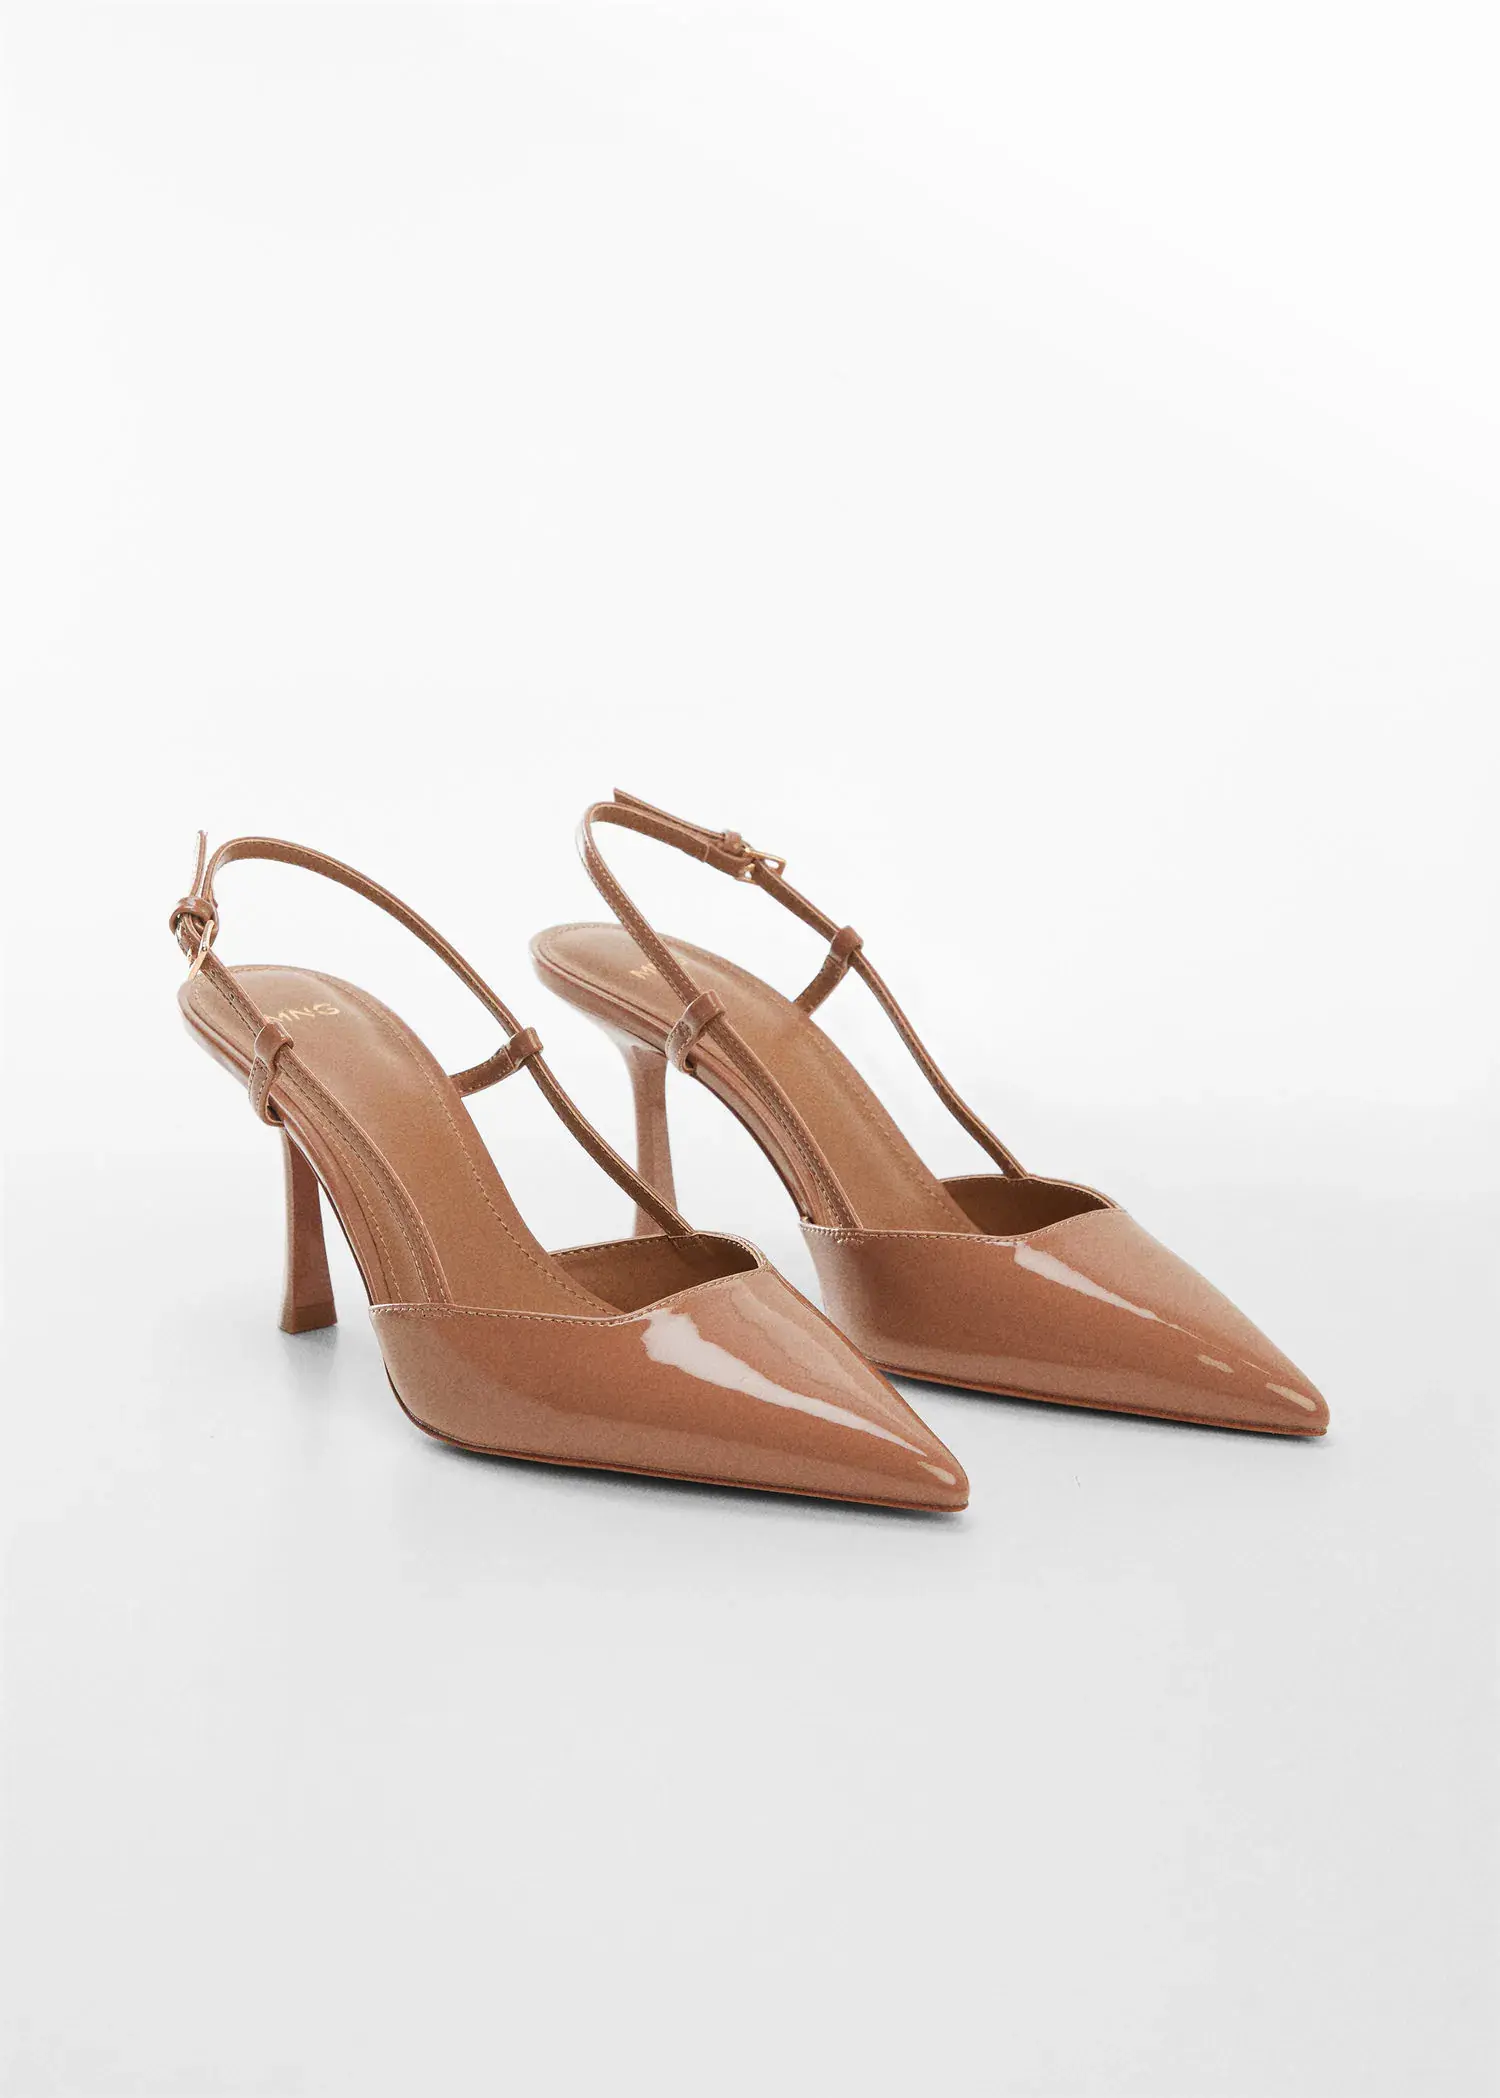 Mango Pointed toe shoe with heel. a close up of a pair of shoes on the ground 